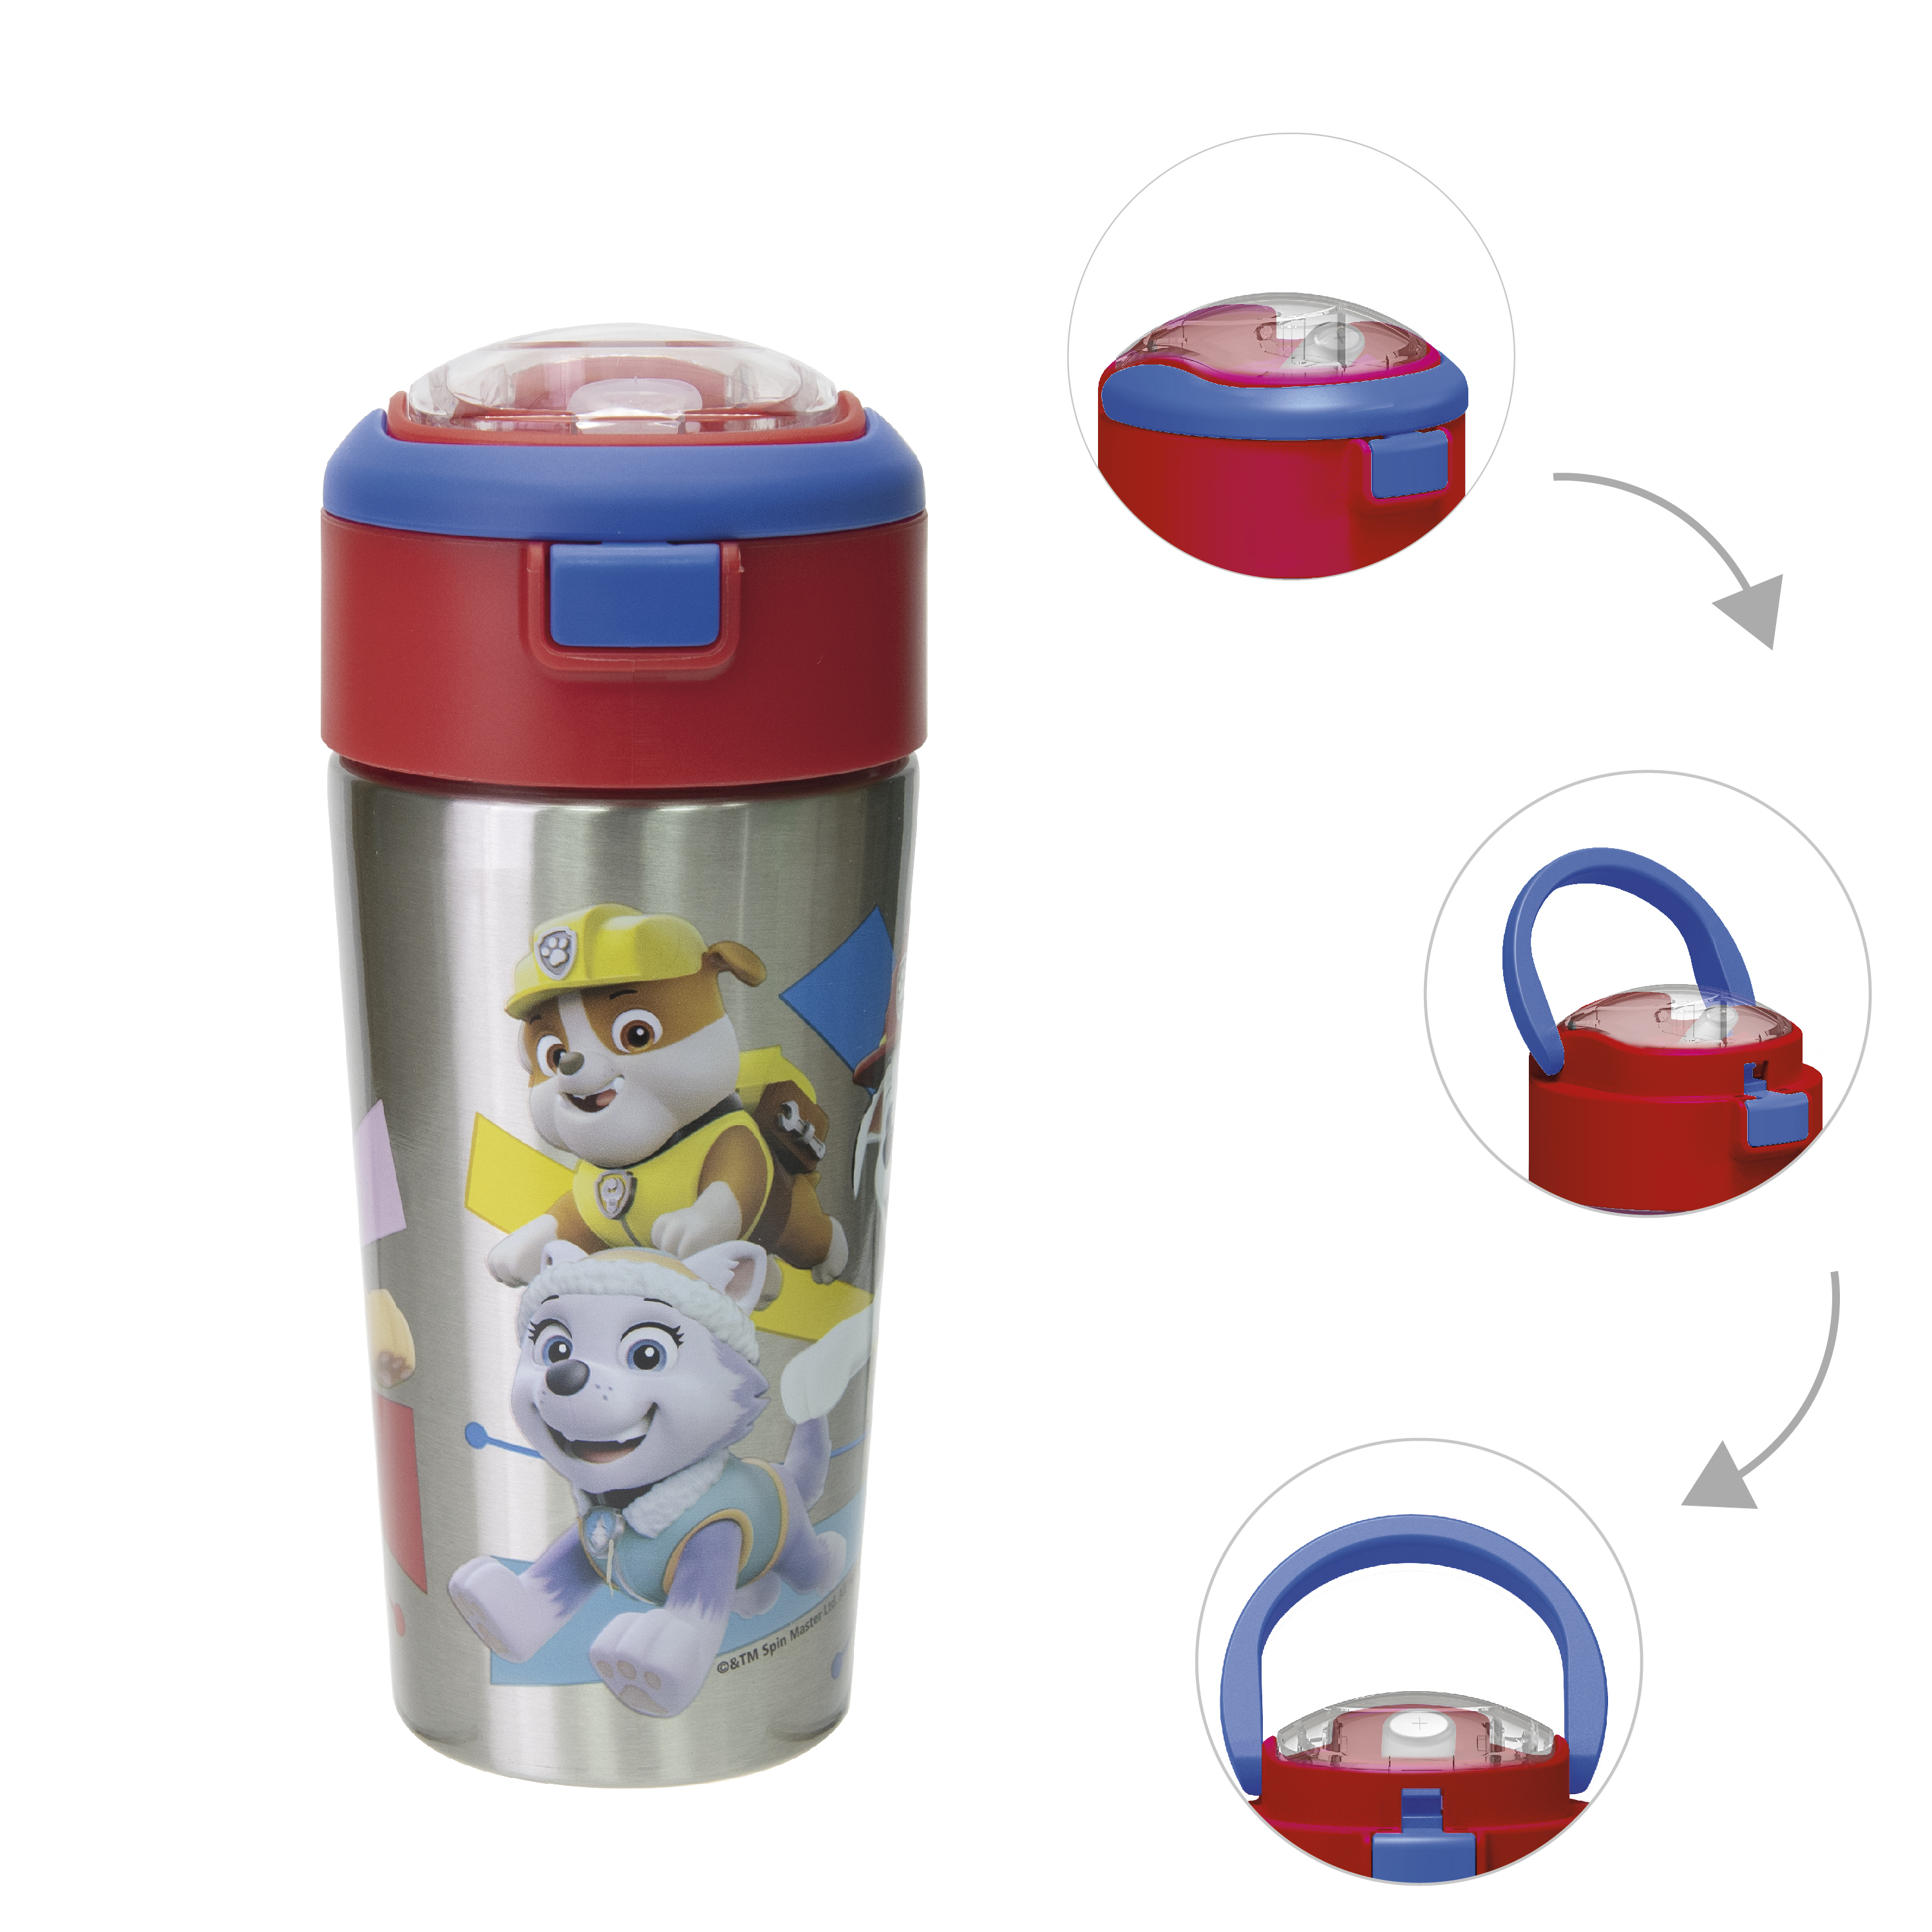 Paw Patrol 12 ounce Vacuum Insulated Reusable Stainless Steel Water Bottle, Skye, Rubble & Friends slideshow image 8